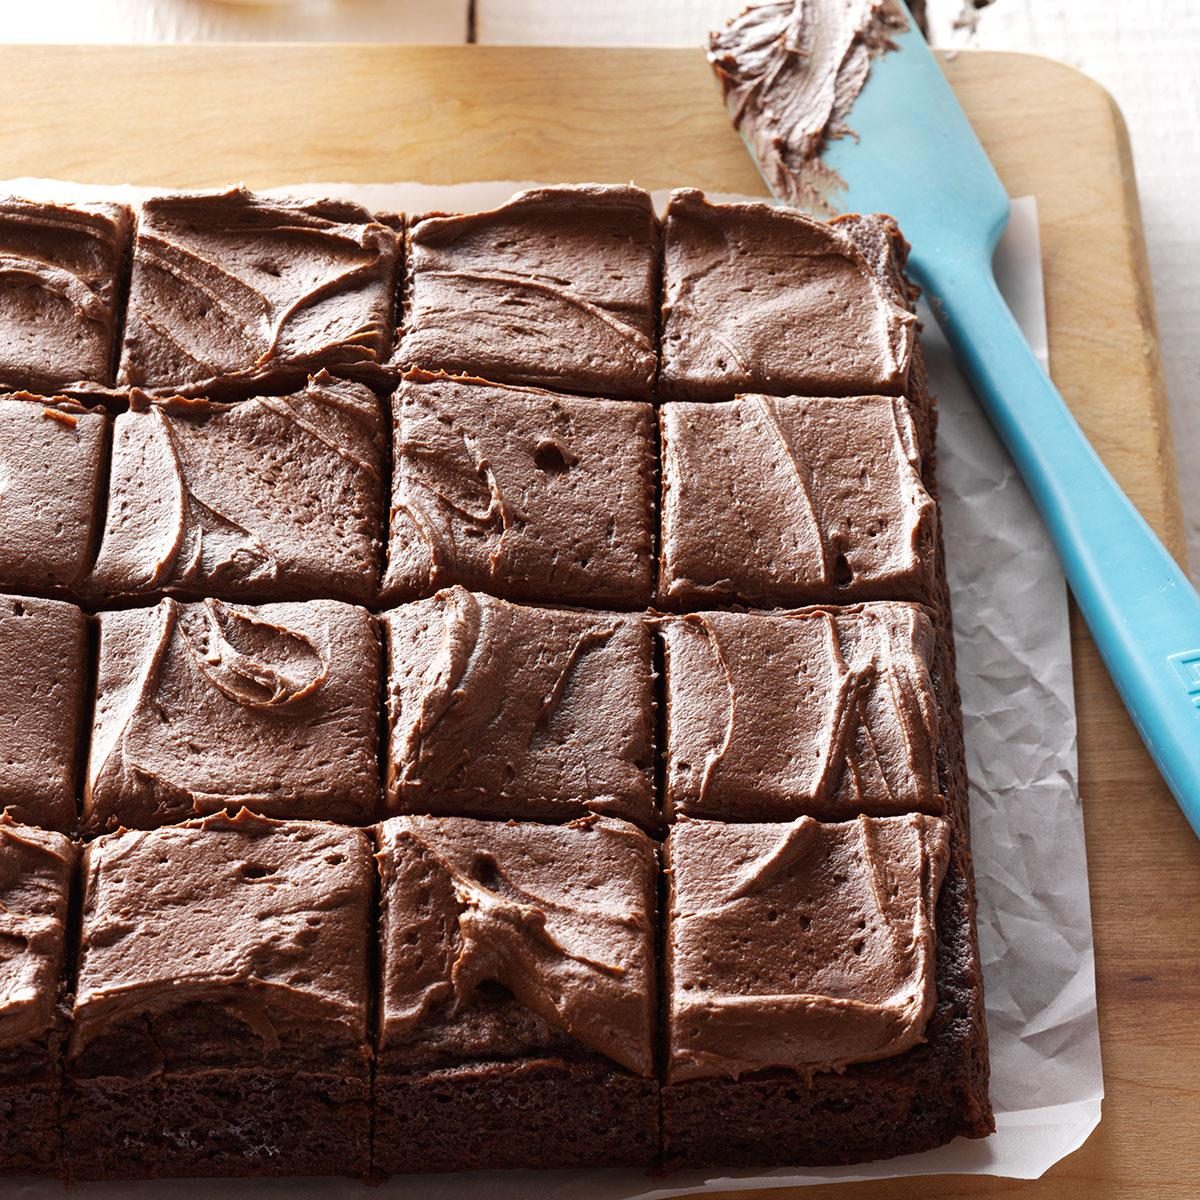 Kitchen gadgets: You don't really need a brownie edge pan